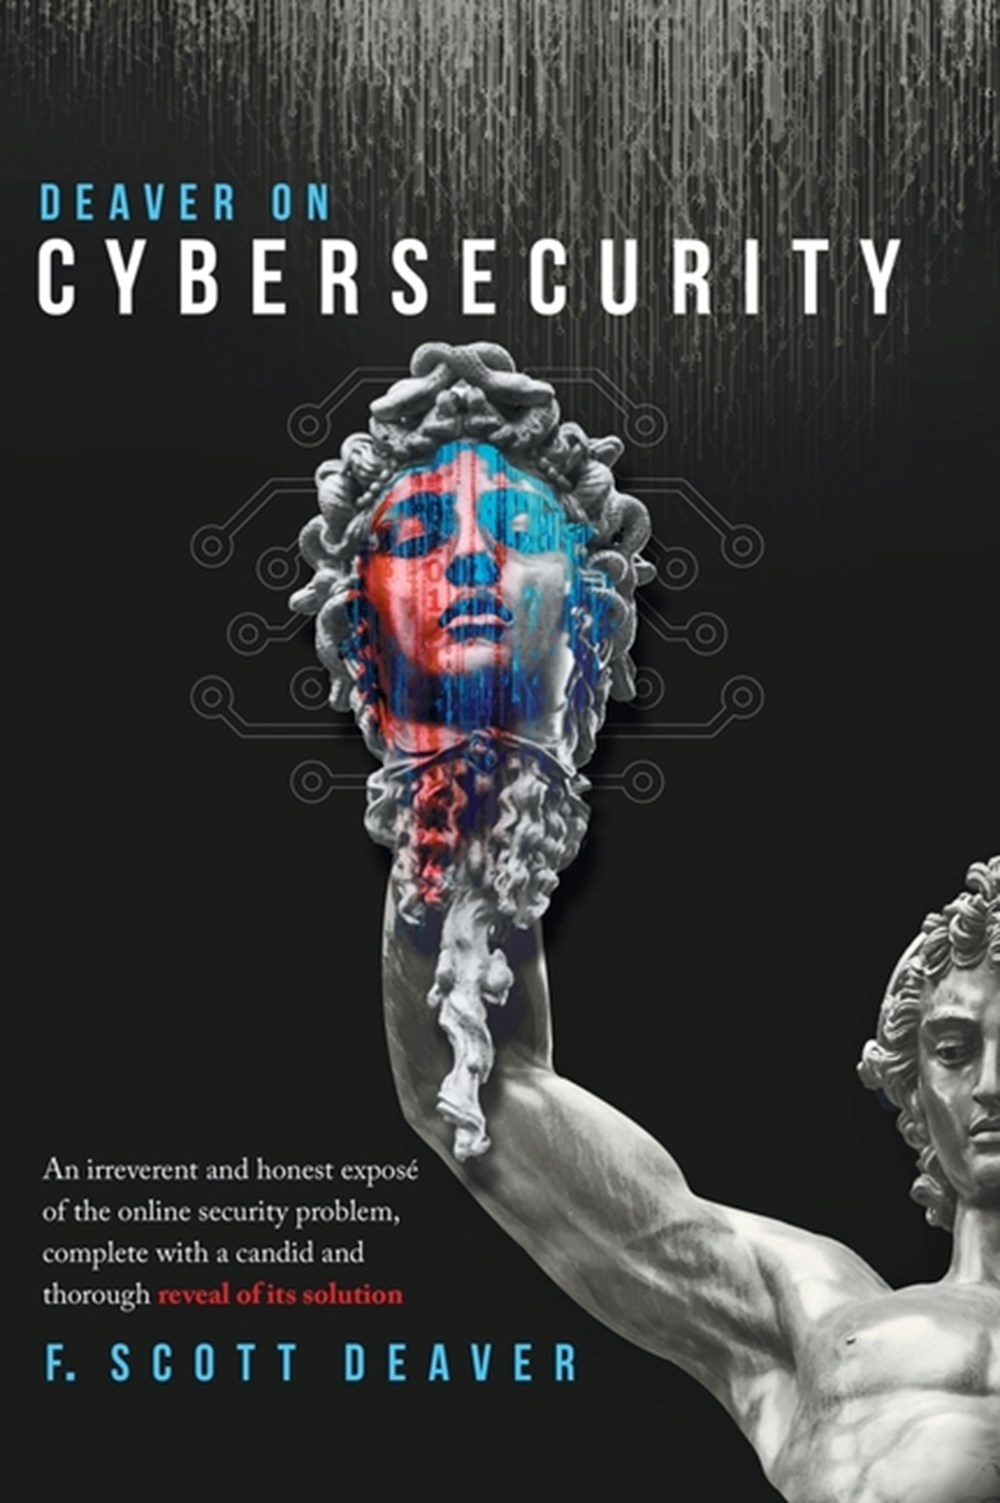 Deaver on Cybersecurity: An irreverent and honest exposé of the online security problem, complete wi